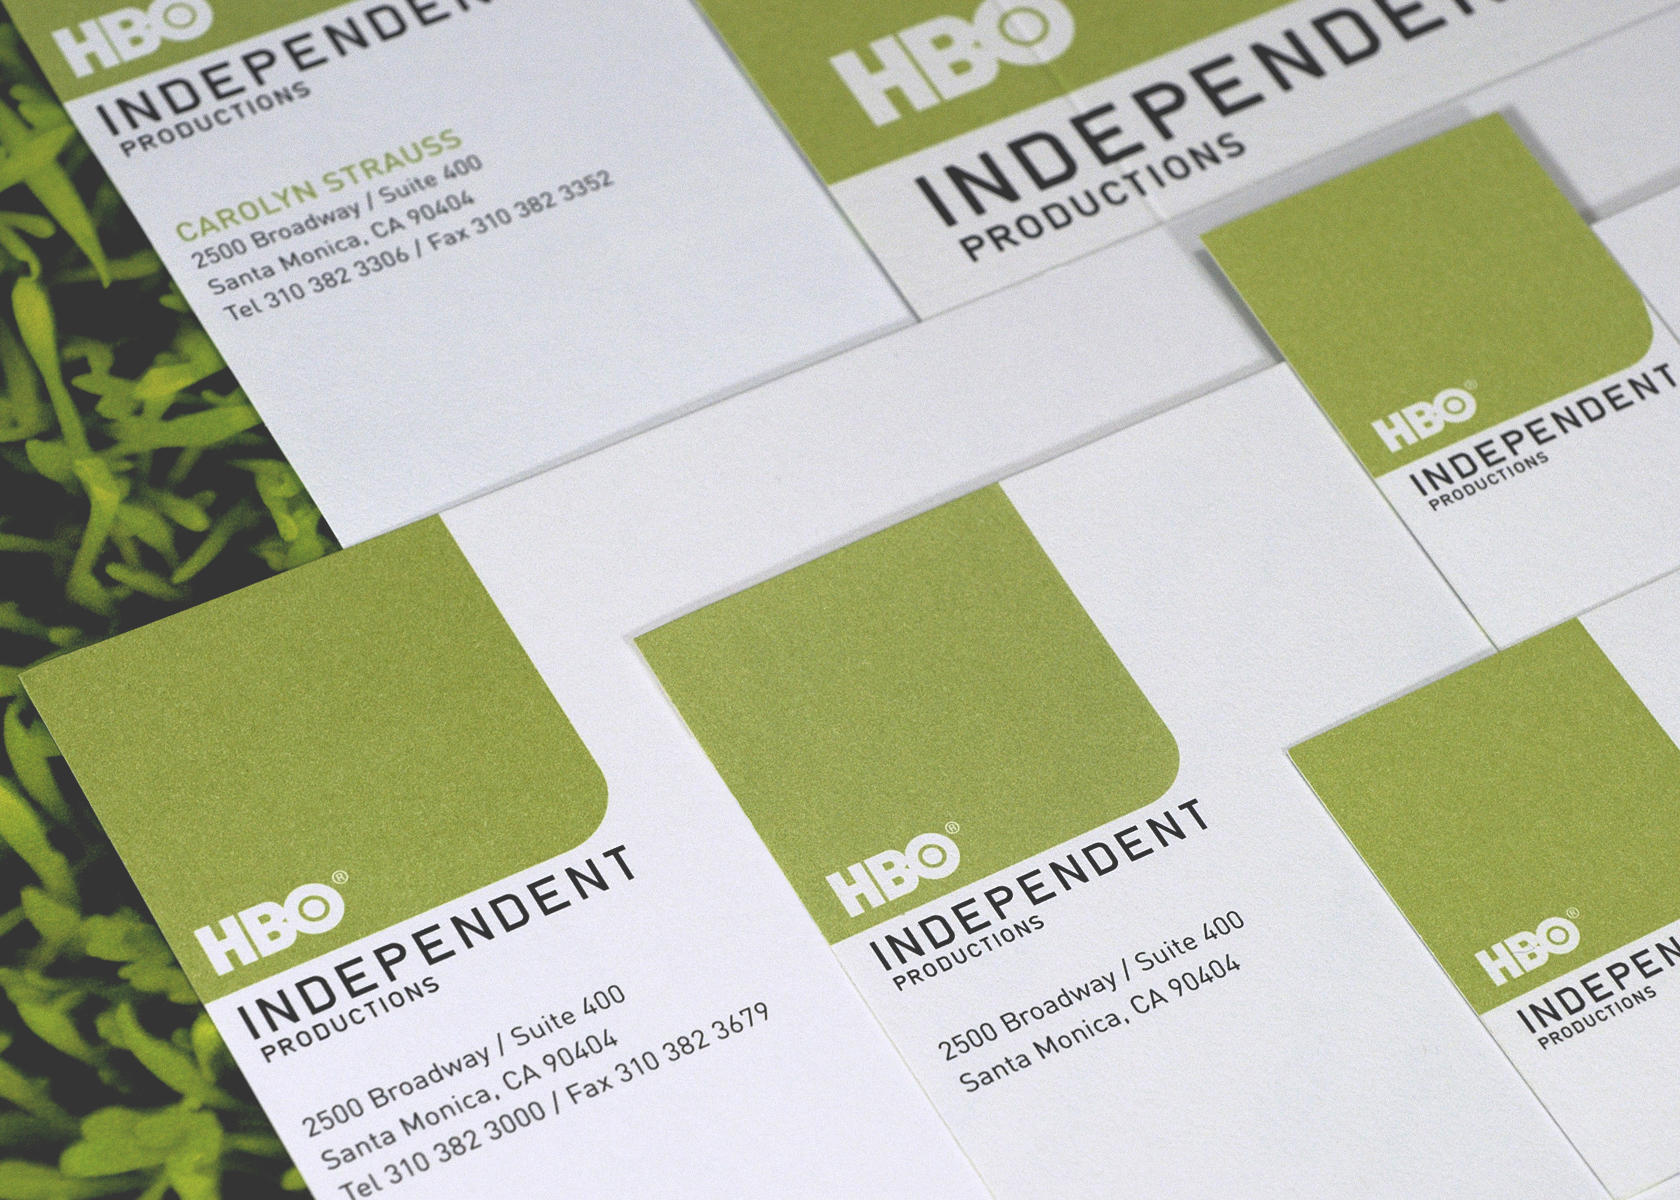 HBO_Independent_03_TRT